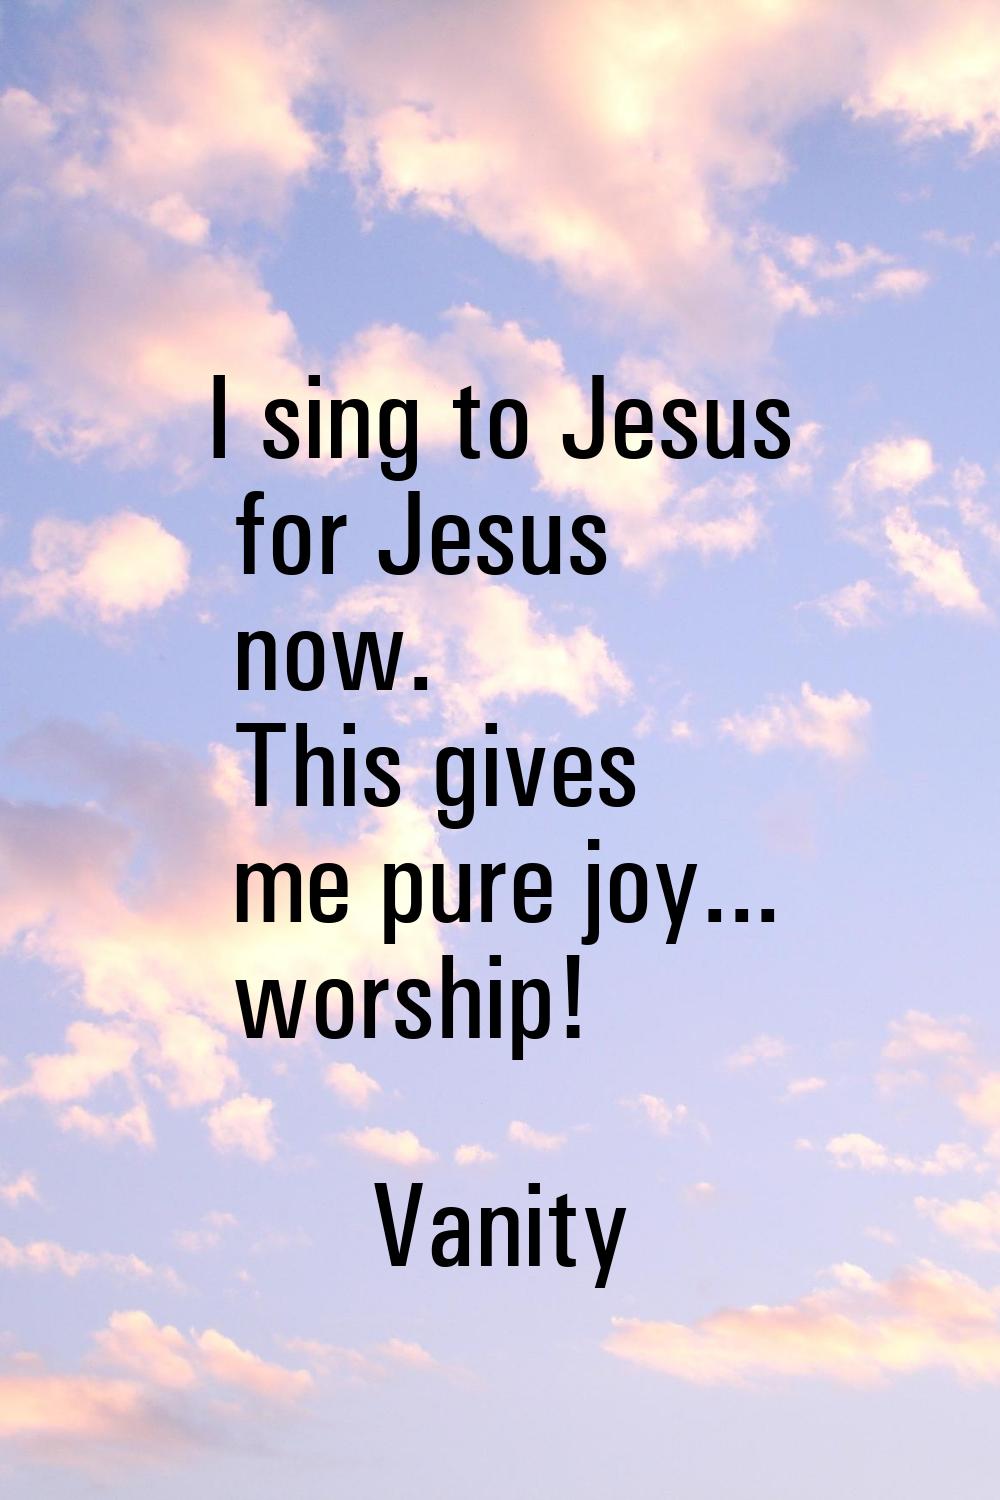 I sing to Jesus for Jesus now. This gives me pure joy... worship!